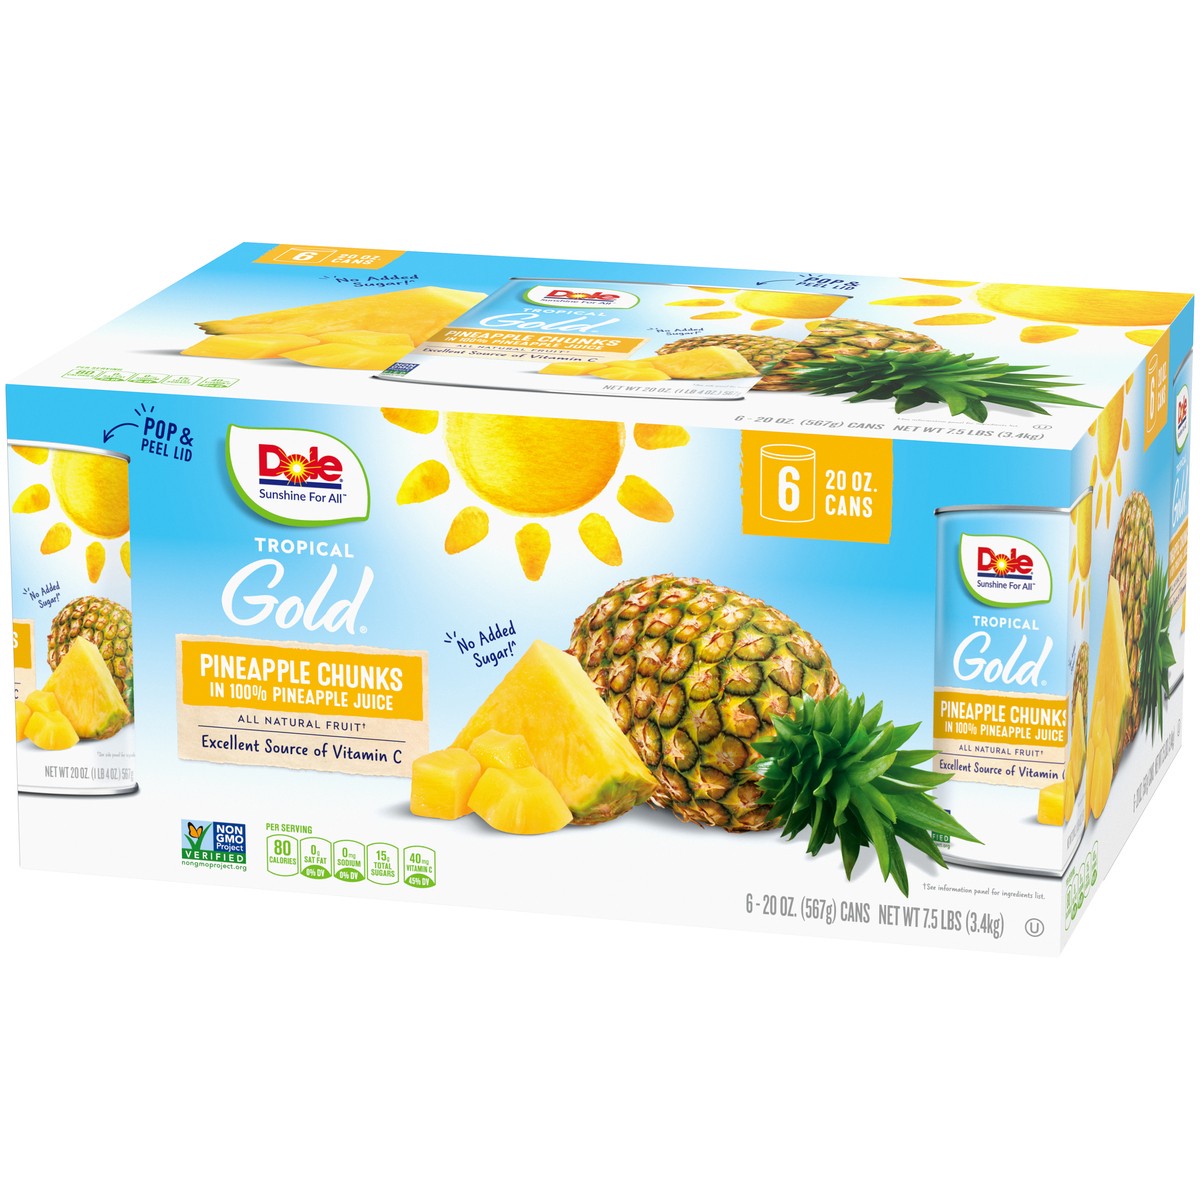 slide 3 of 9, Dole Tropical Gold Pineapple Chunks in 100% Pineapple Juice 6-20 oz. Cans, 7.5 lb